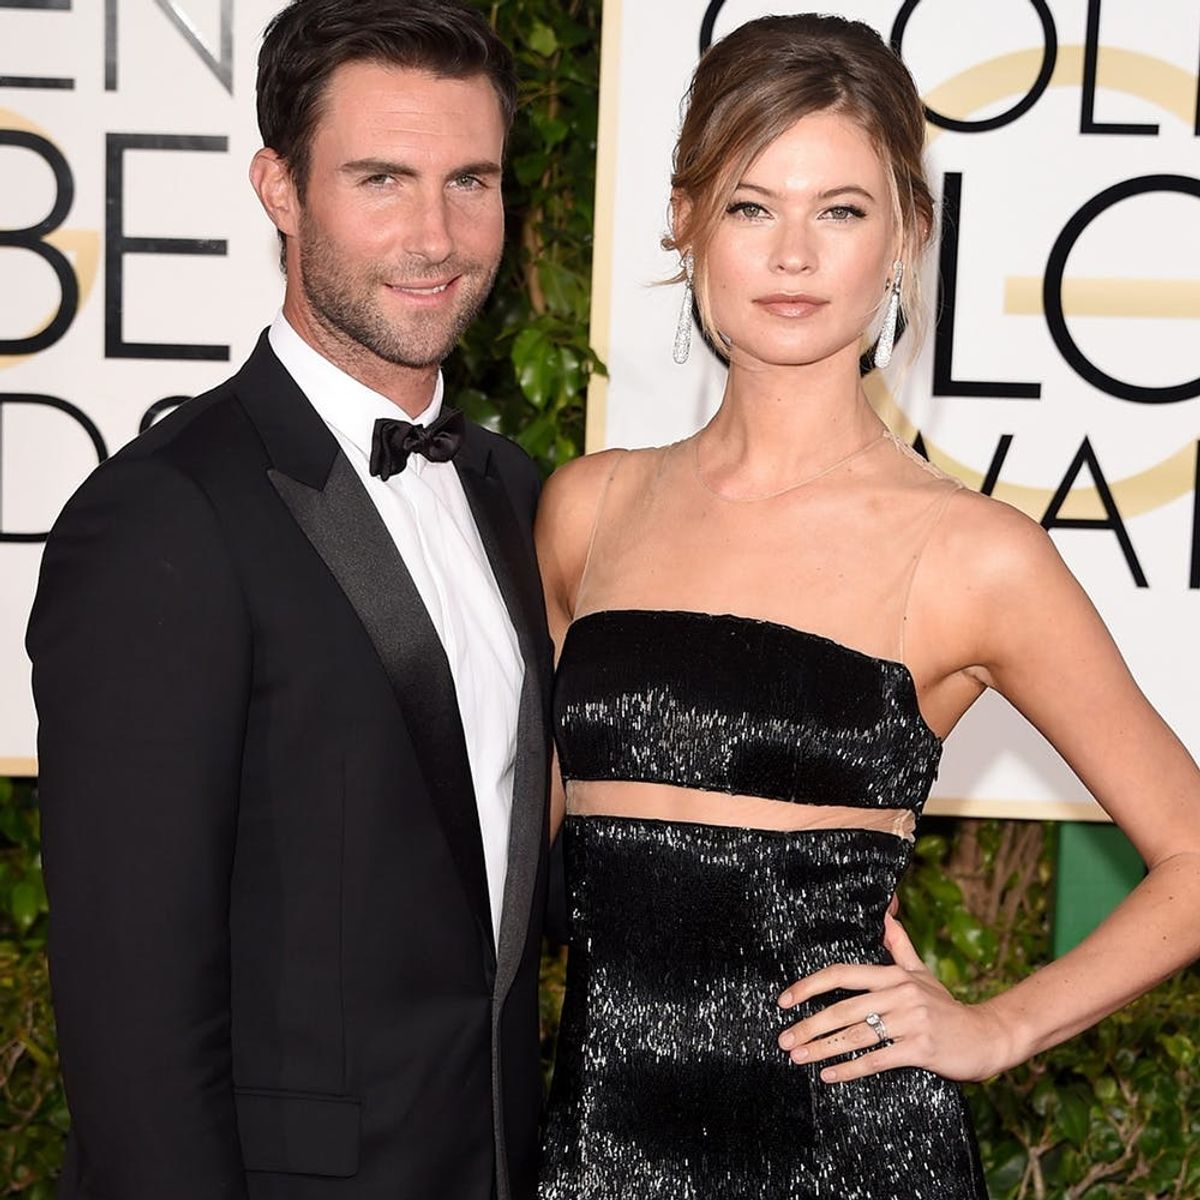 Adam Levine Just Proved He’s Going to Be the Cutest Dad Ever